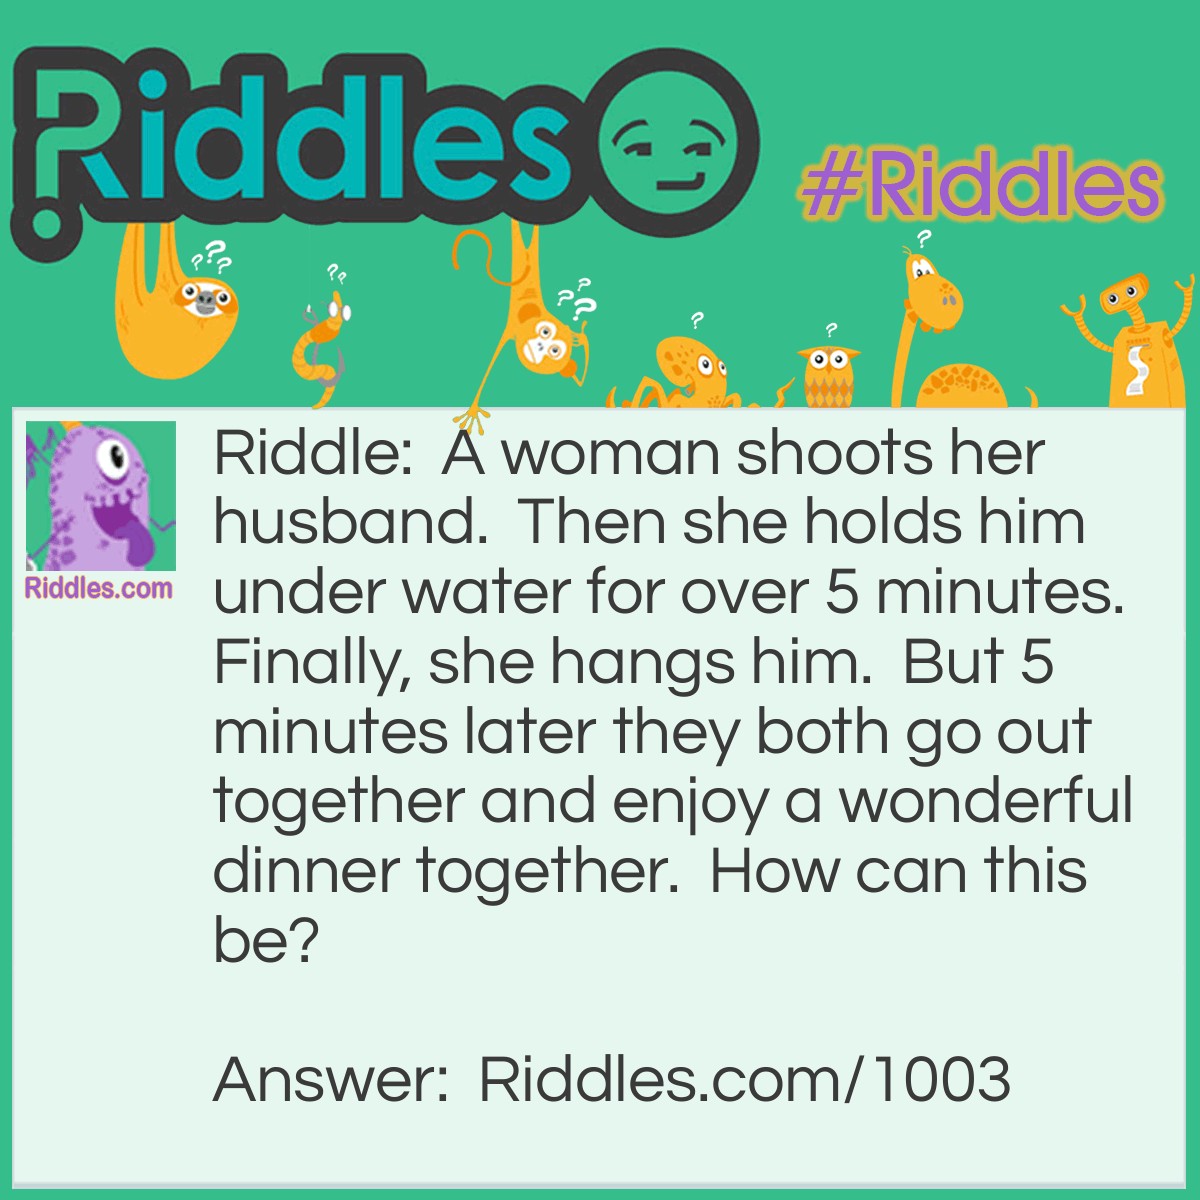 Riddle: A woman shoots her husband.  Then she holds him under water for over 5 minutes.  Finally, she hangs him.  But 5 minutes later they both go out together and enjoy a wonderful dinner together.  How can this be? Answer: The woman was a photographer. She shot a picture of her husband, developed it, and hung it up to dry.